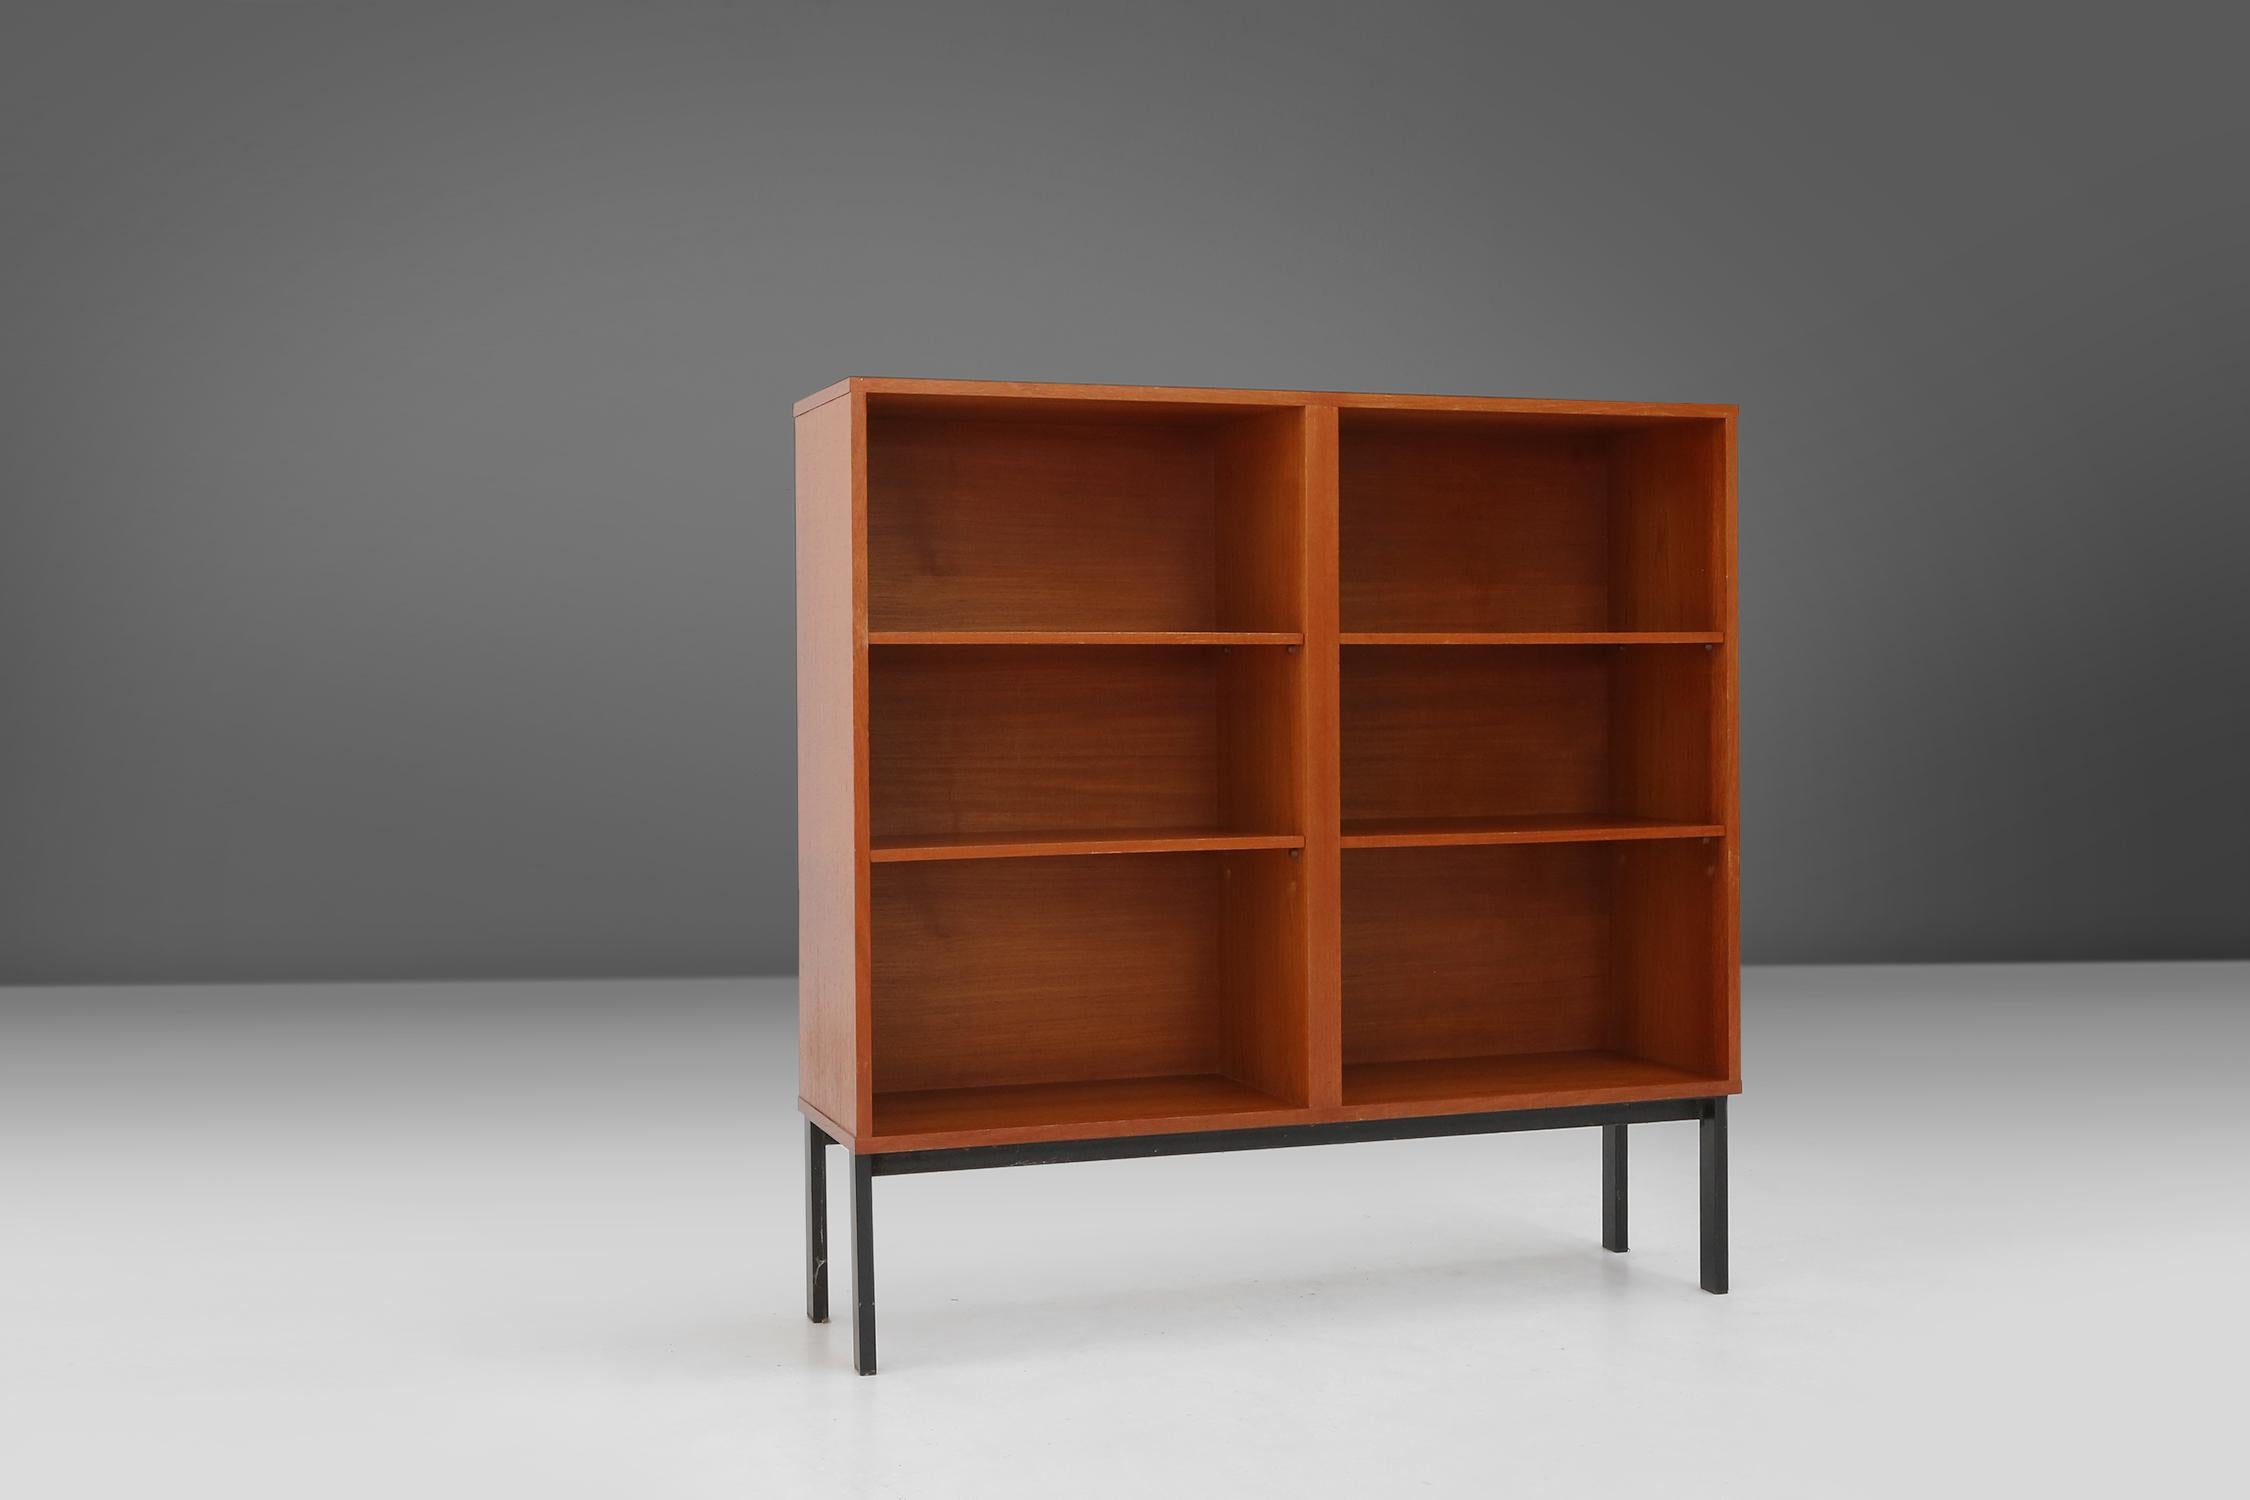 Made in Belgium in the 1960s, this mid-century cabinet combine clean lines, organic shapes and functional beauty. The teak wood is a durable and natural material, which has a warm and elegant look. The metal base gives a nice contrast to the